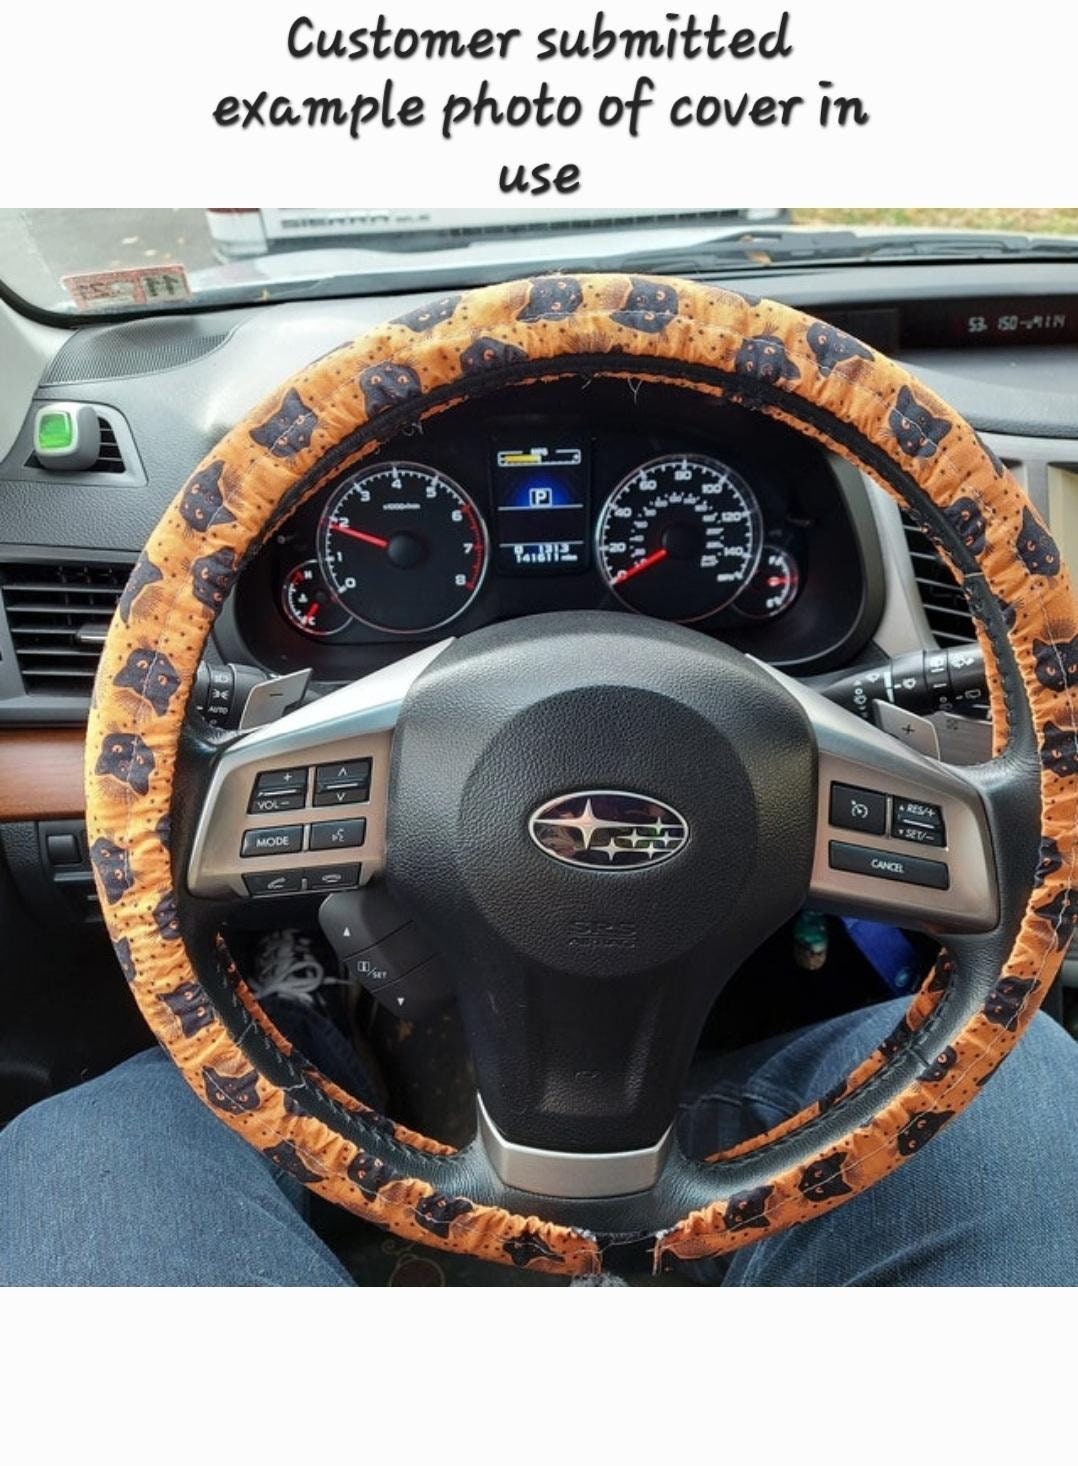 Witch's Black Cat Steering Wheel Cover made with Licensed Disney Fabric - Harlow's Store and Garden Gifts